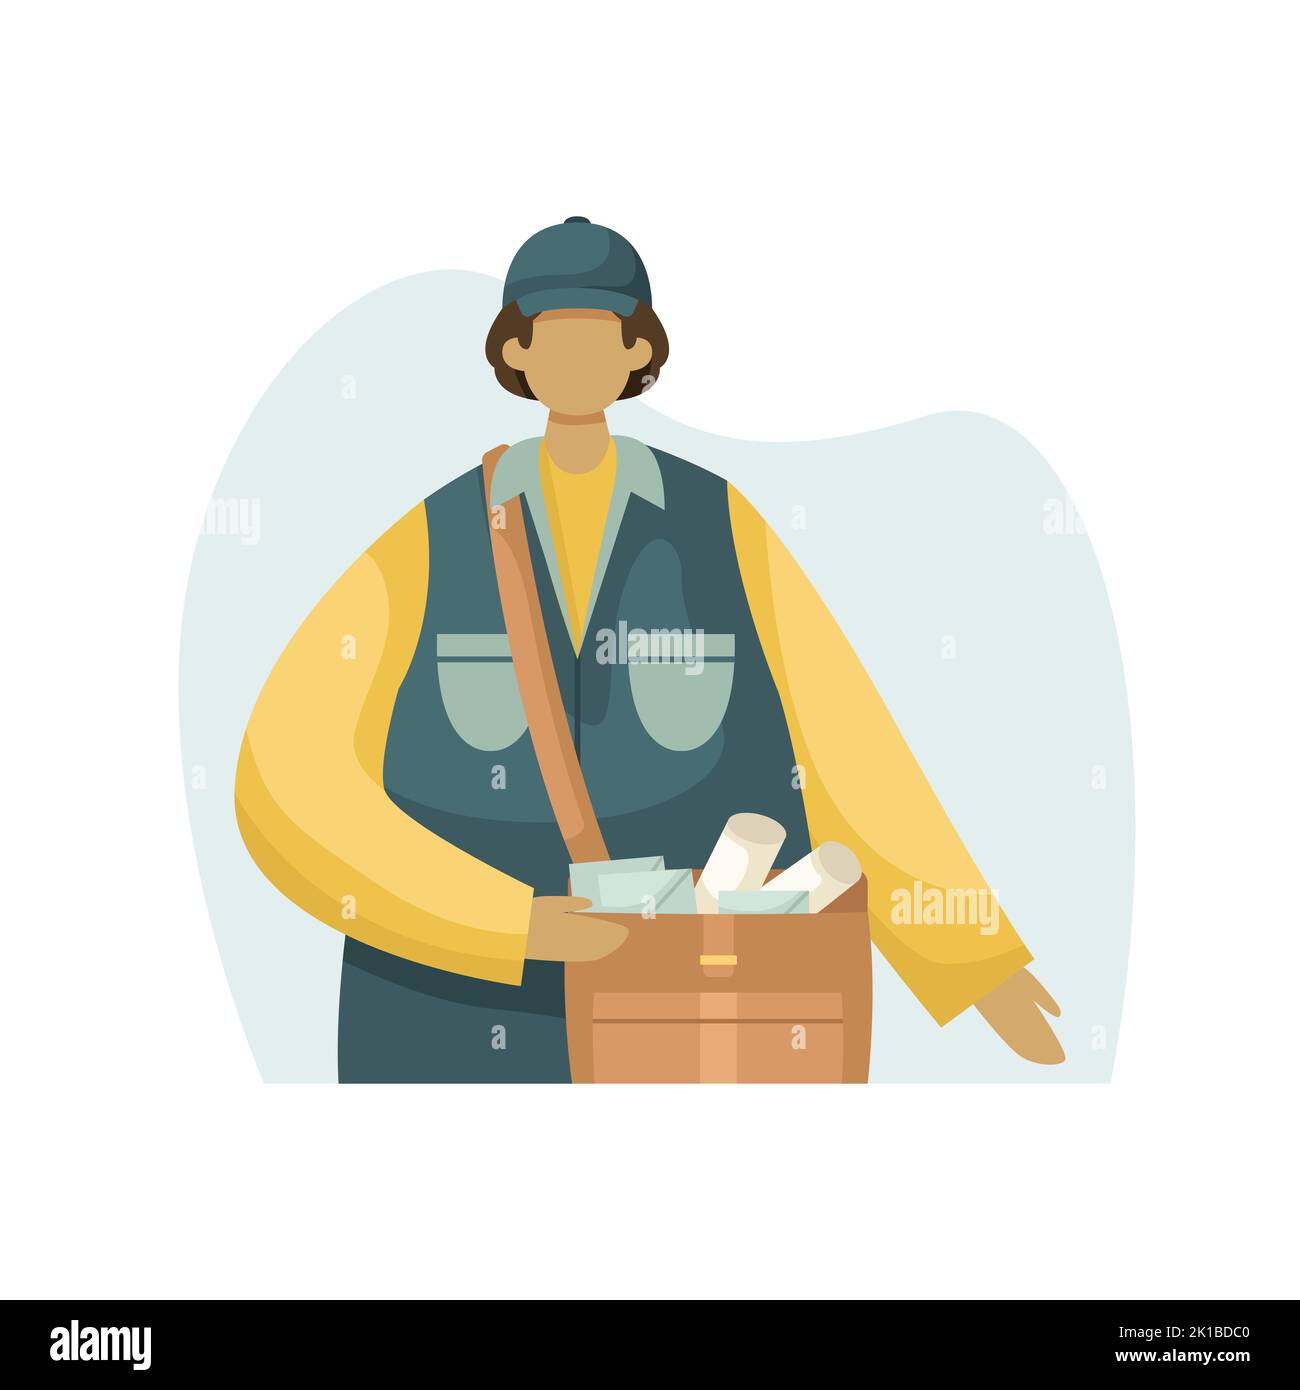 Vector illustration of a postman with a bag of letters and newspapers. Profession. Stock Vector